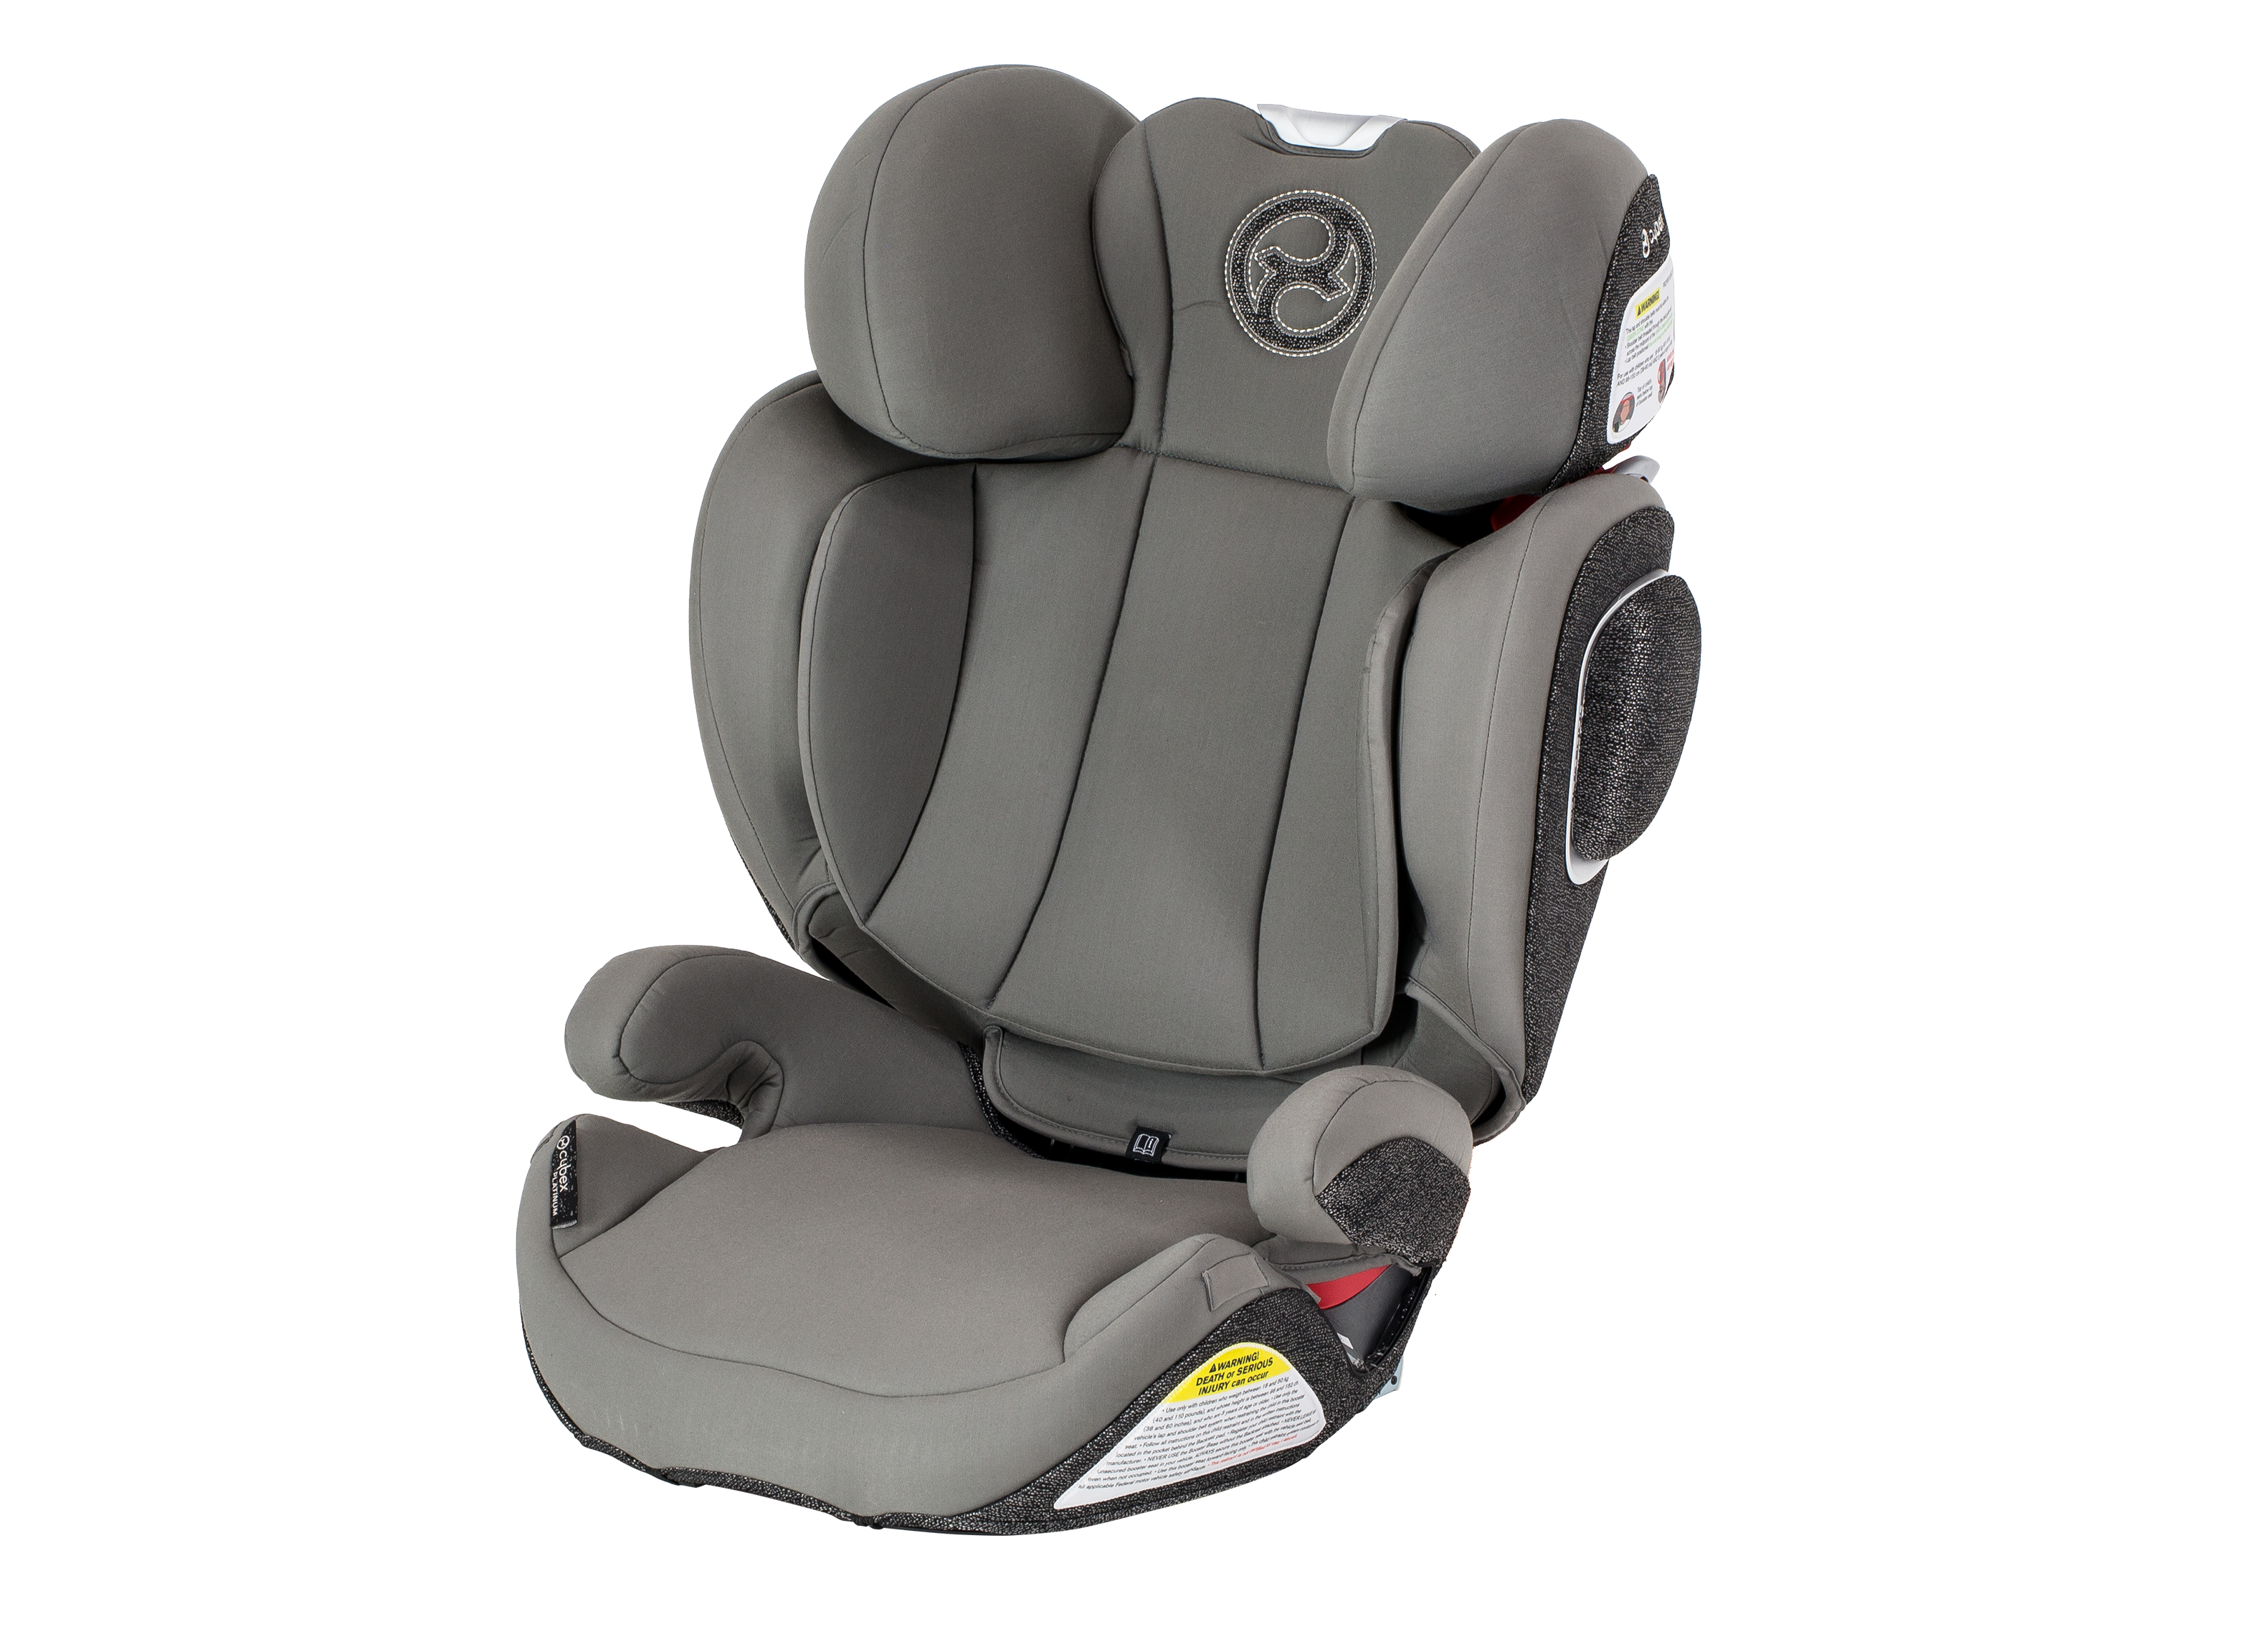 Cybex Solution Z-Fix Car Seat Review - Consumer Reports